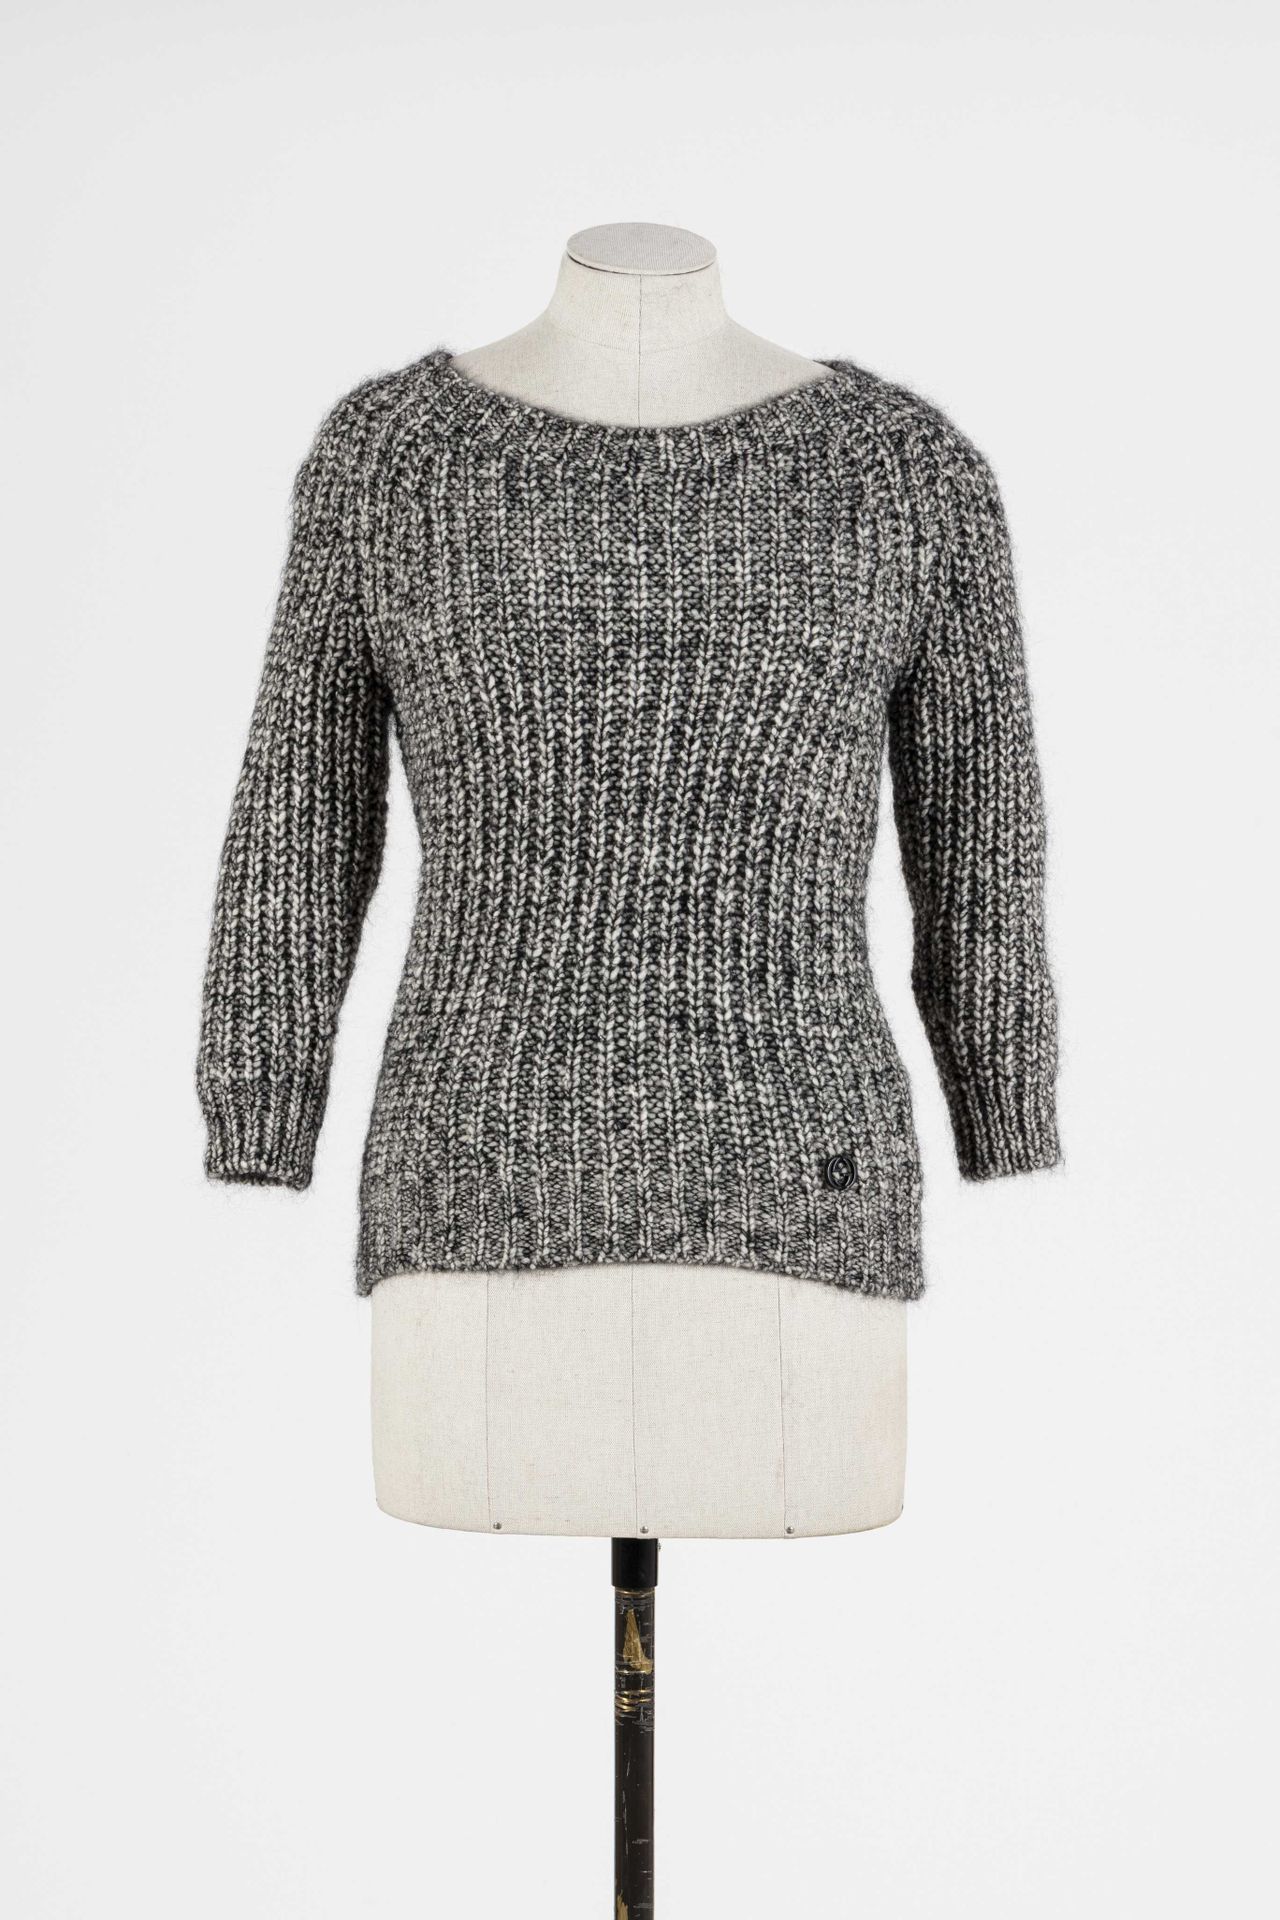 Null GUCCI : grey wool sweater, round neck, 3/4 sleeves. 

T. S